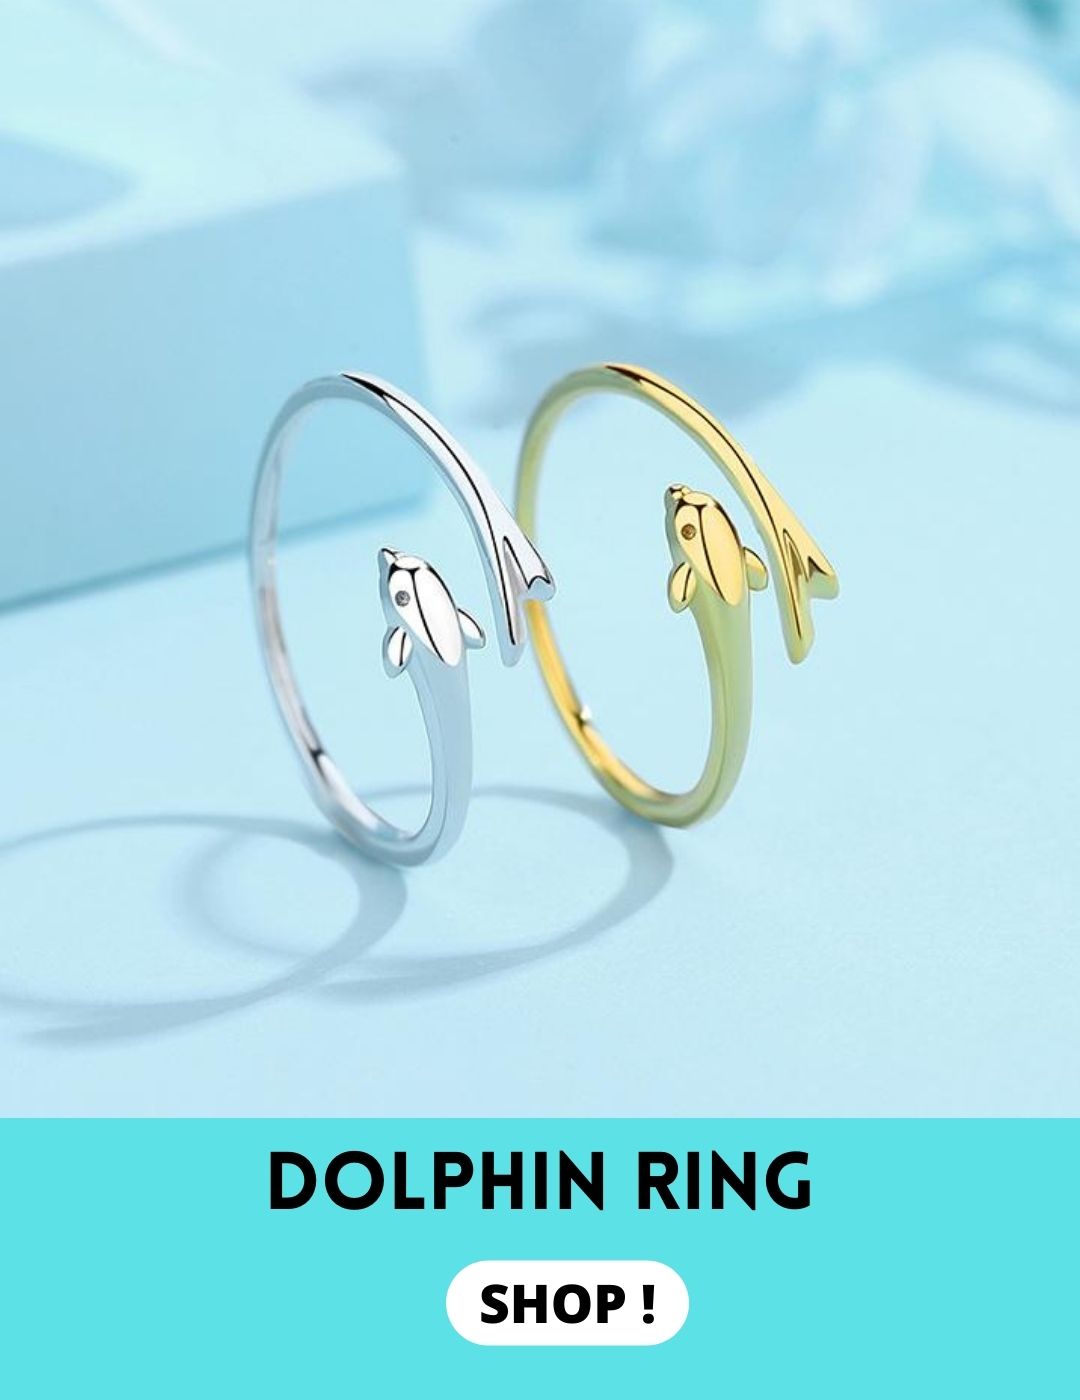 Meaning of dolphin jewelry